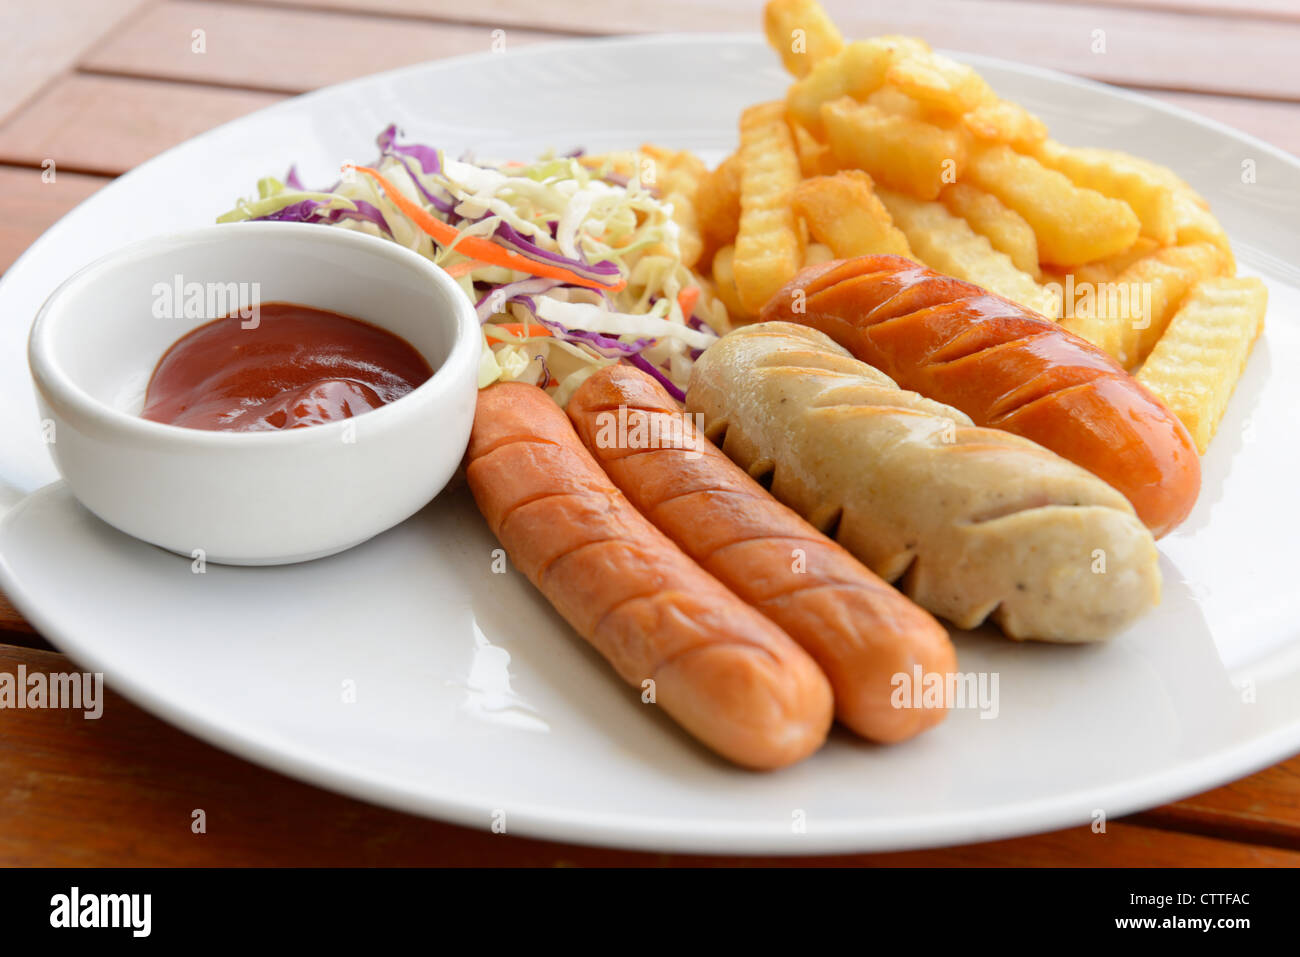 Mixed sausage served with french fried in the white dish put on the wood table Stock Photo